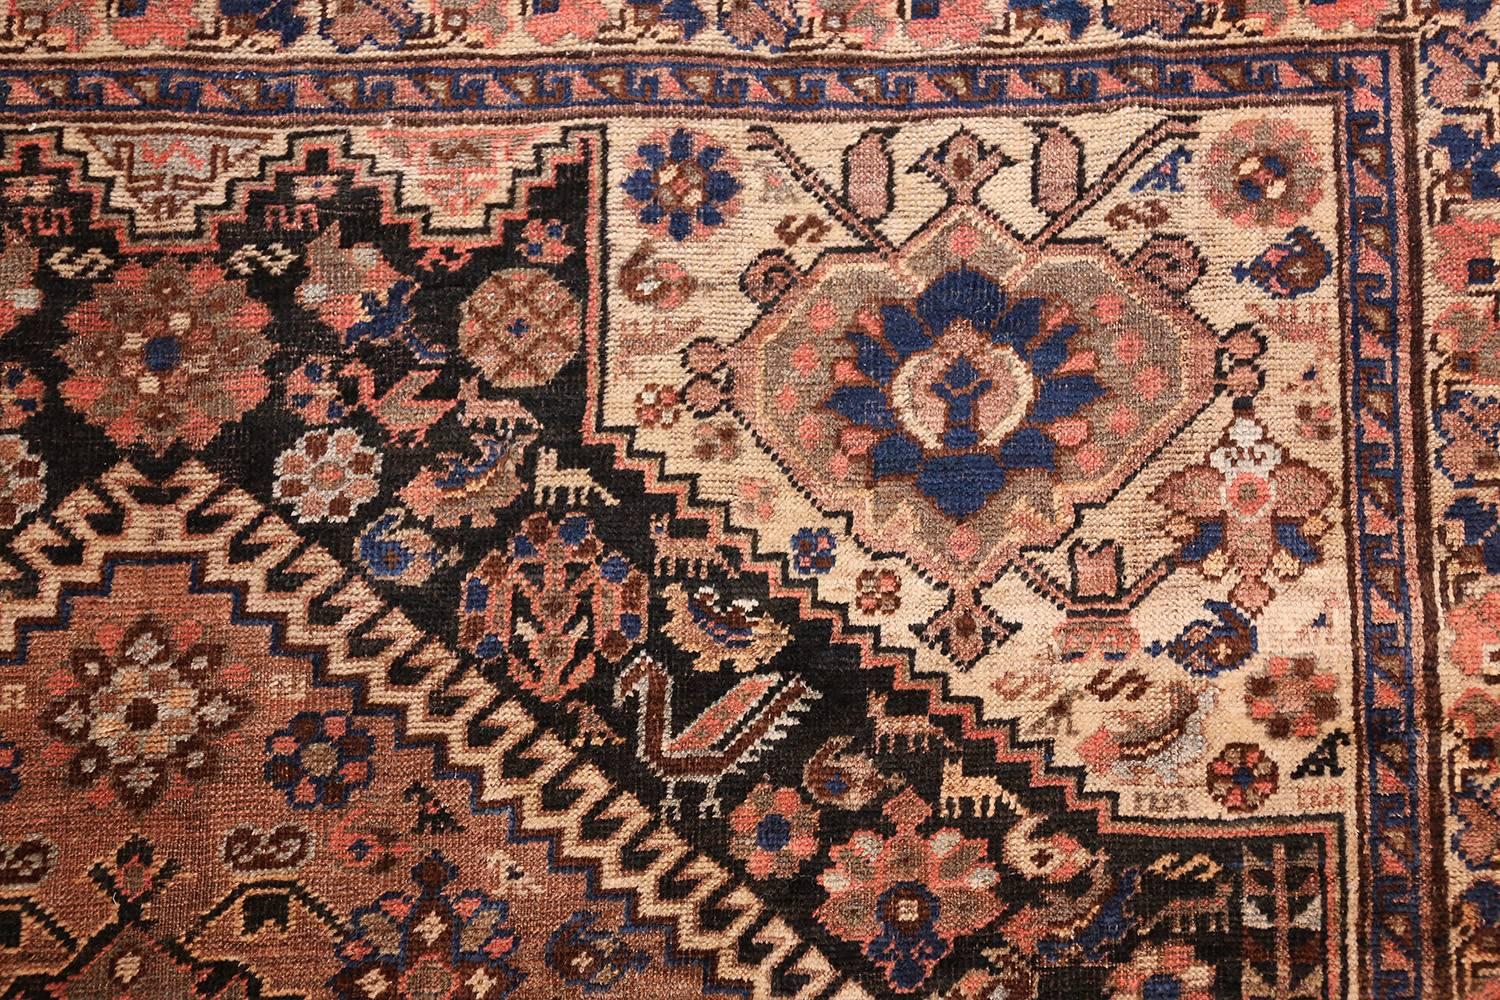 Tribal Antique Persian Qashqai Gallery Size Rug. Size: 7 ft x 16 ft 8 in 